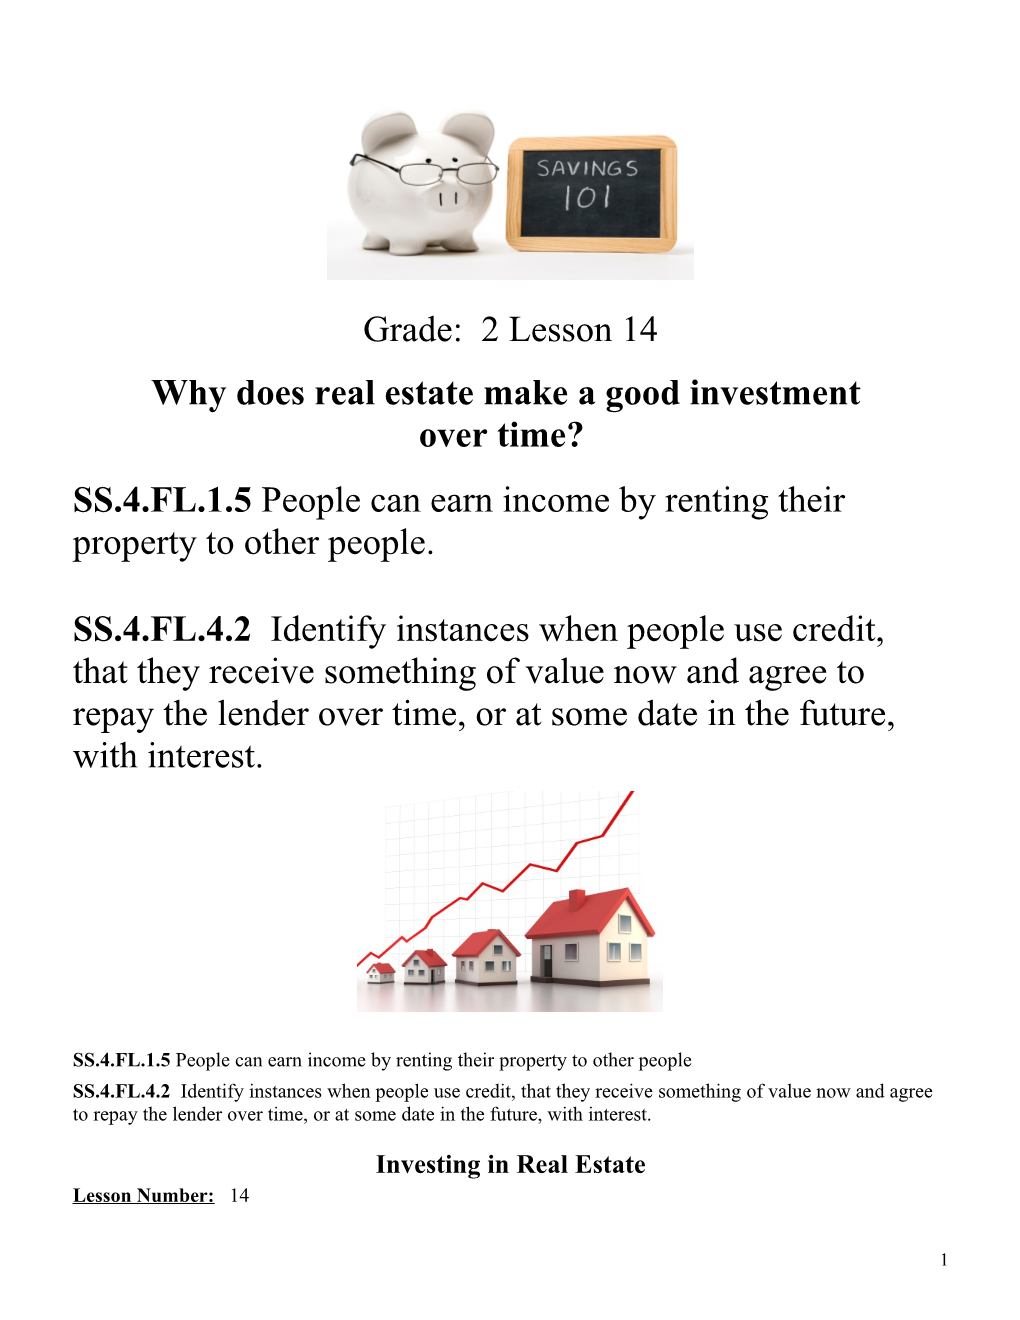 Why Does Real Estate Make a Good Investment